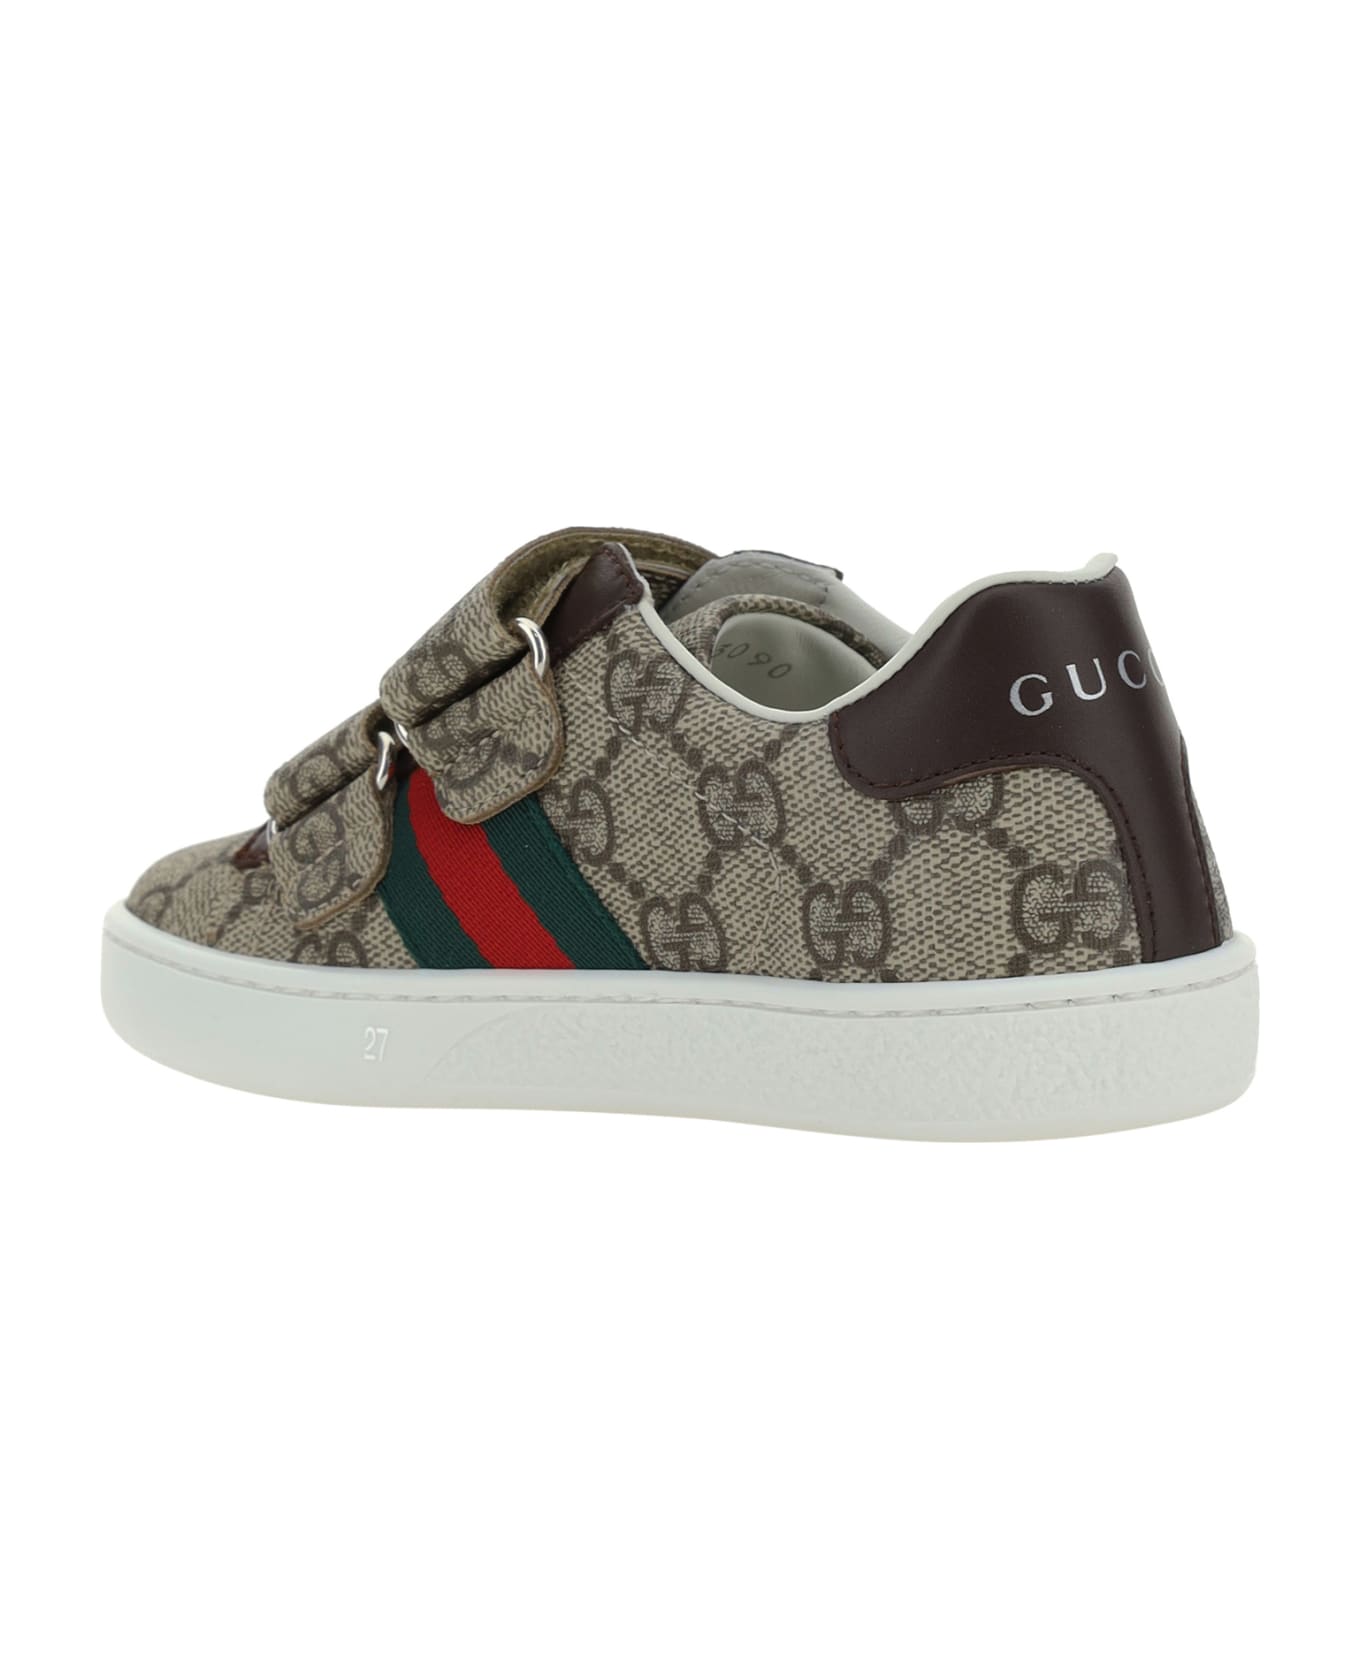 Gucci Sneakers For Boy - Beige